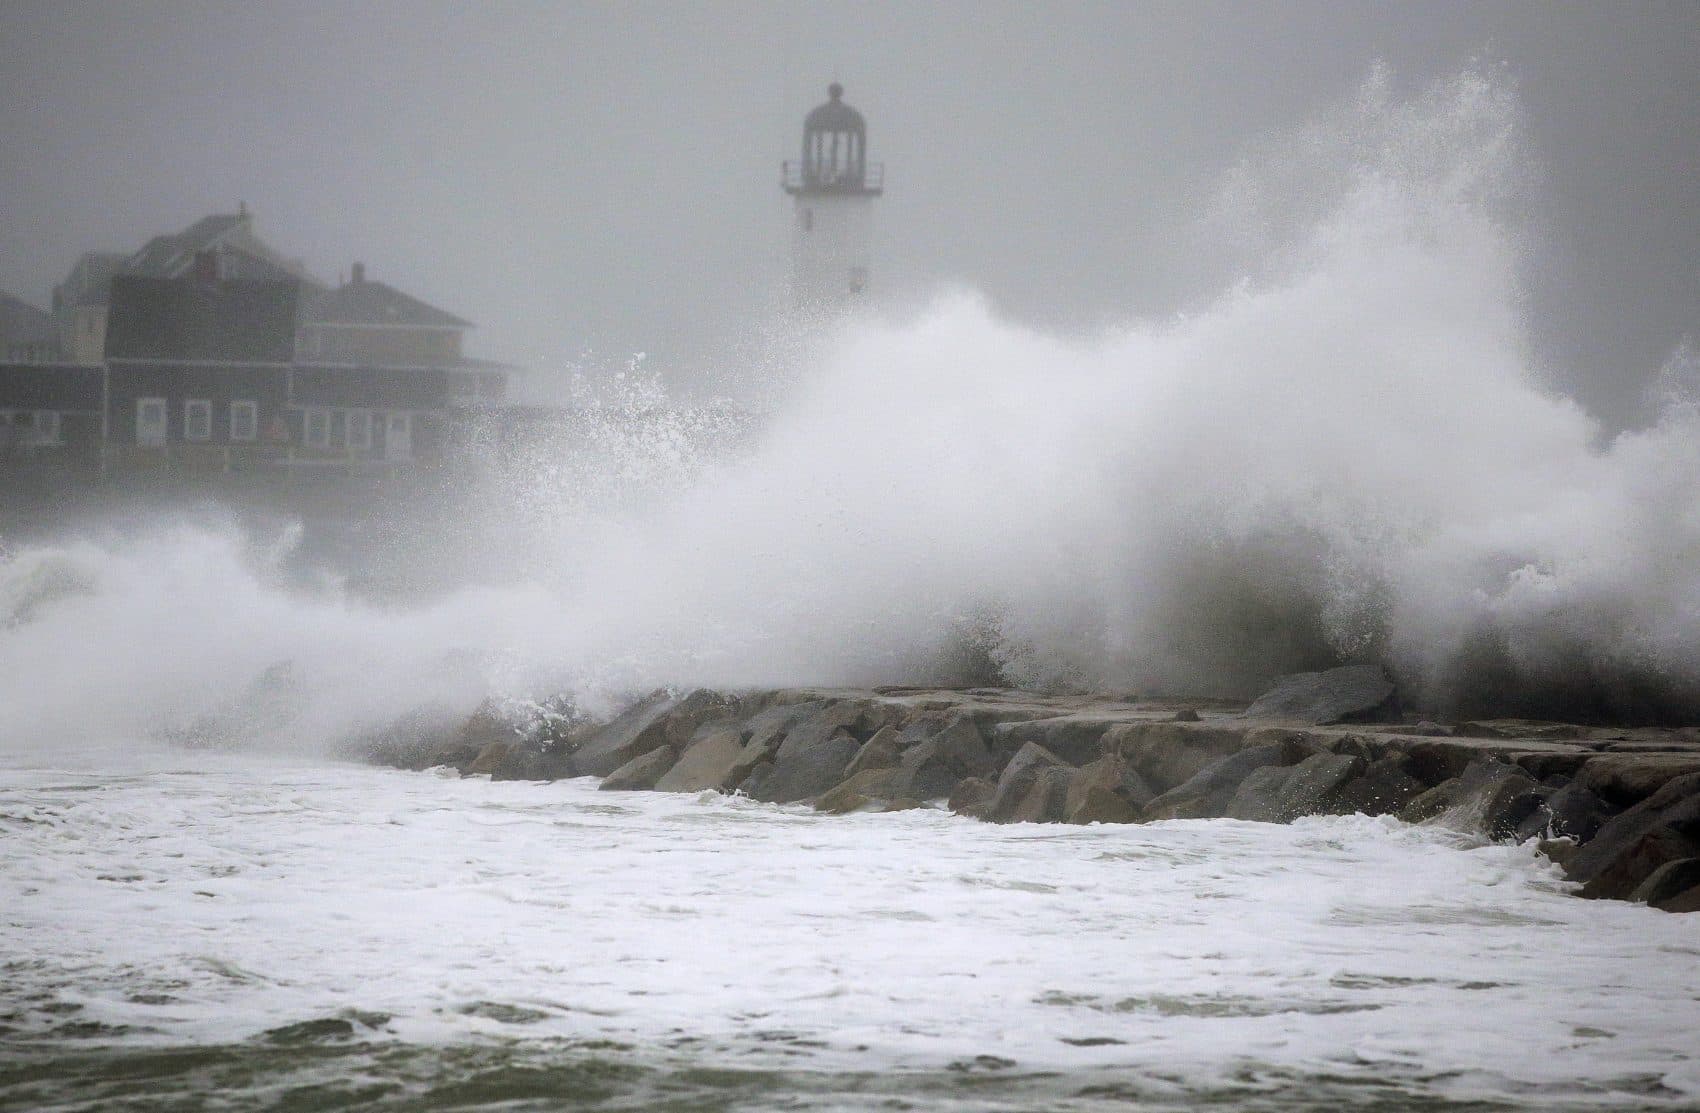 Waves crash against a seawall near the Scituate Lighthouse on Friday in Scituate. (Steven Senne/AP)